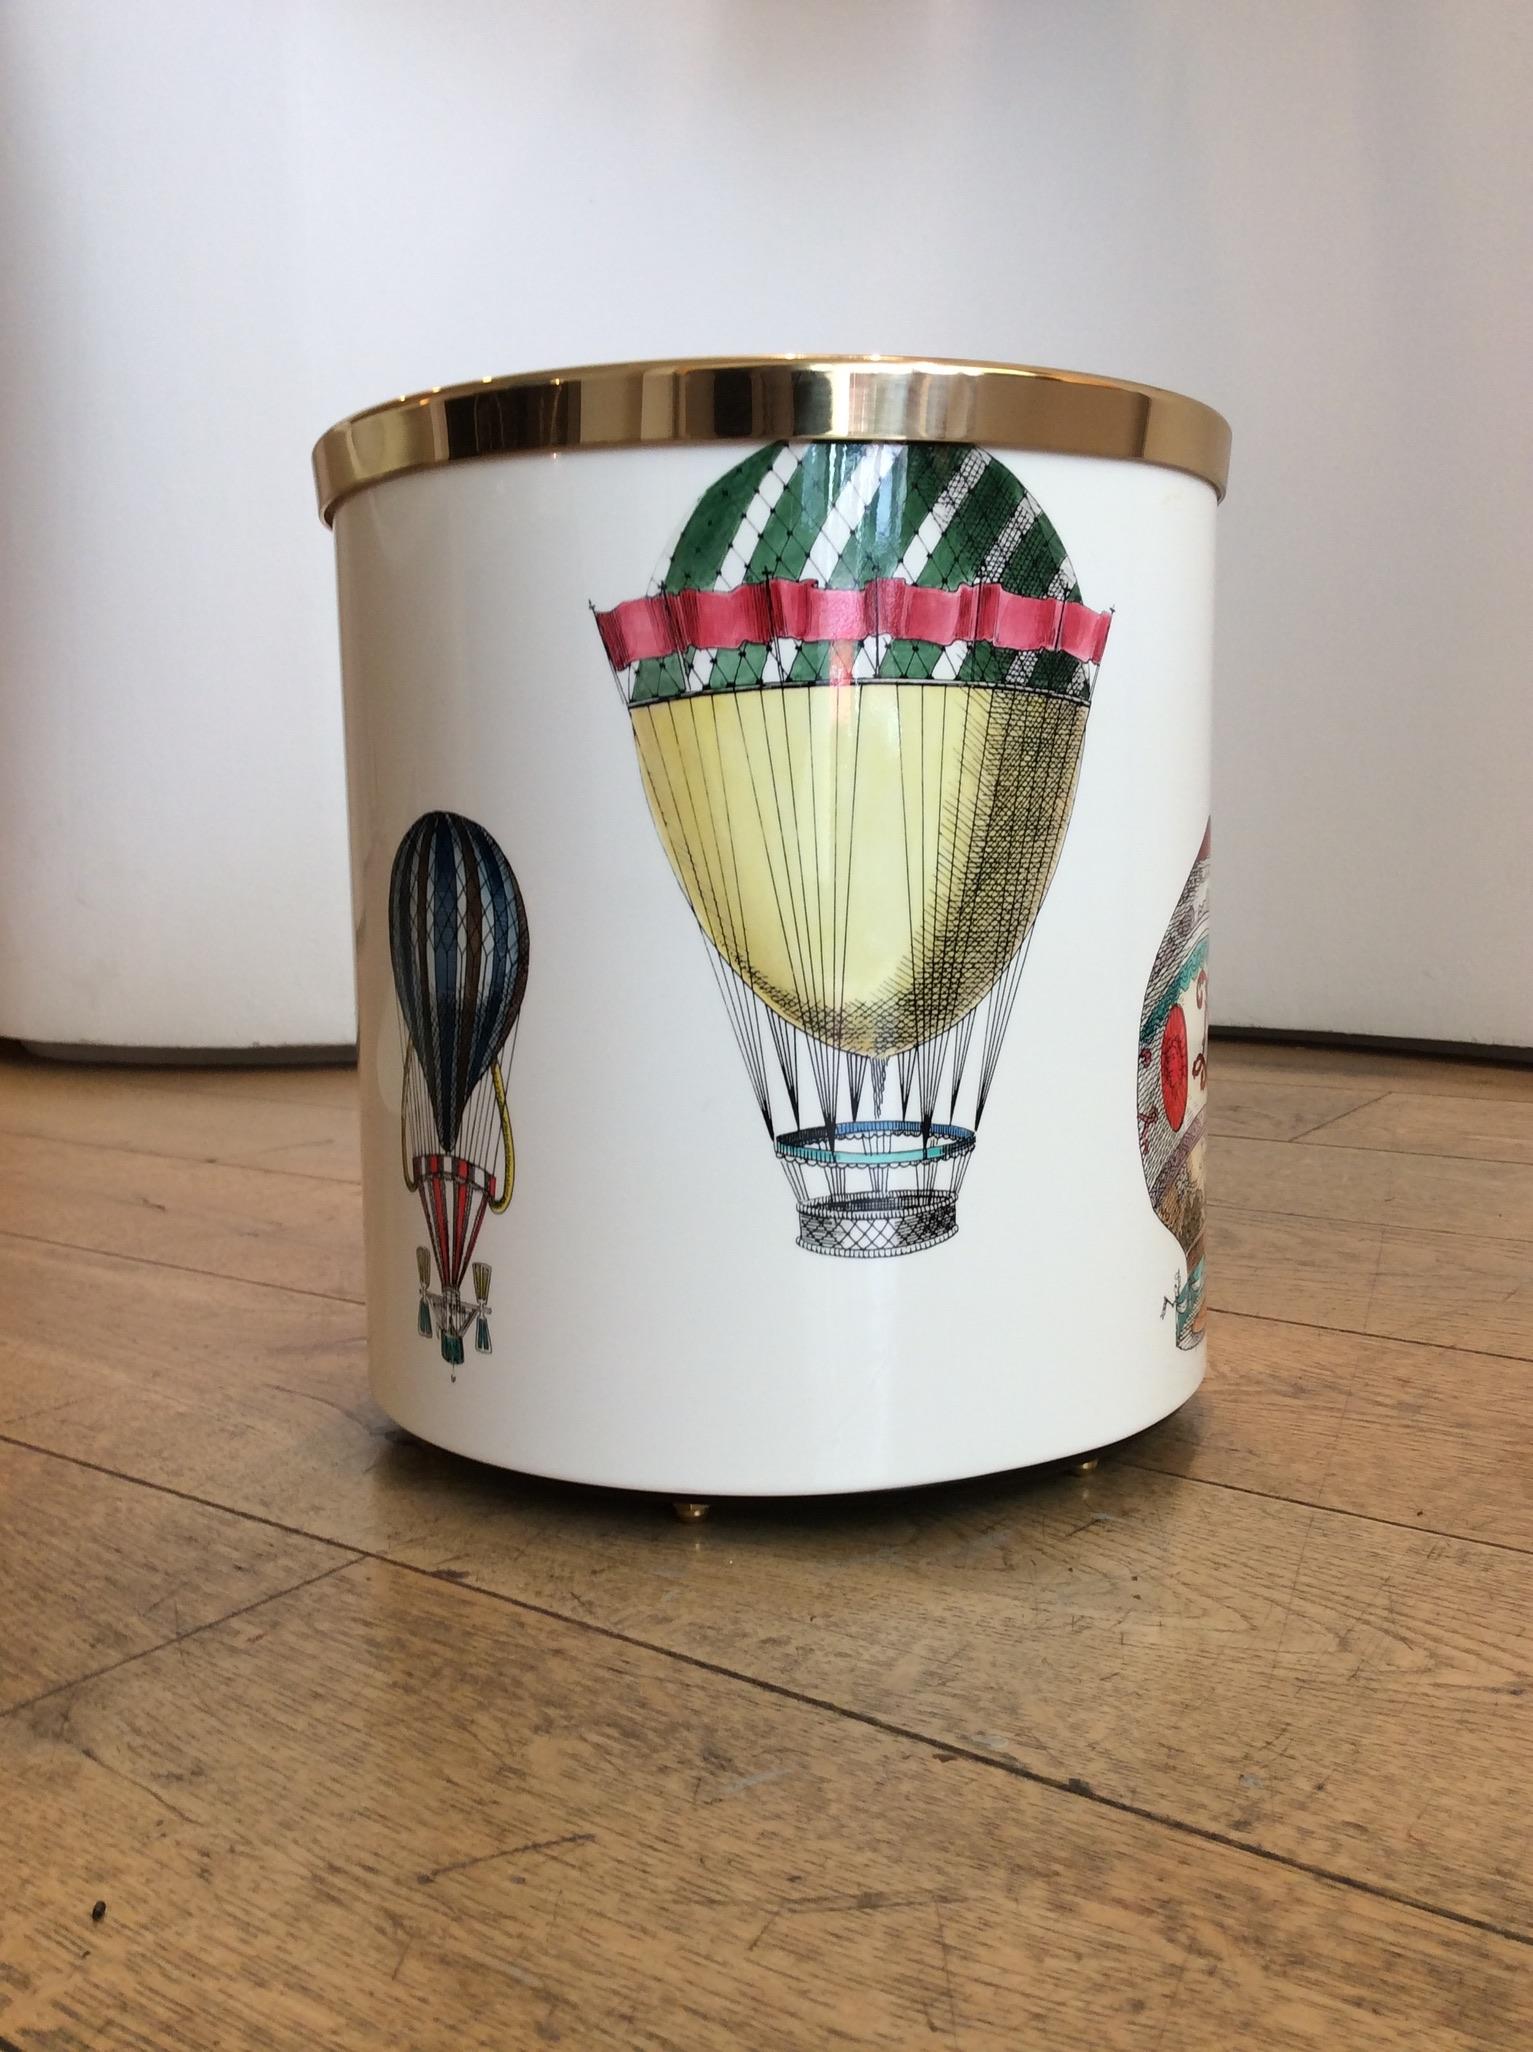 Italian 'Palloni' 'Hot Air Balloons' Waste Paper Basket by Fornasetti, Contemporary